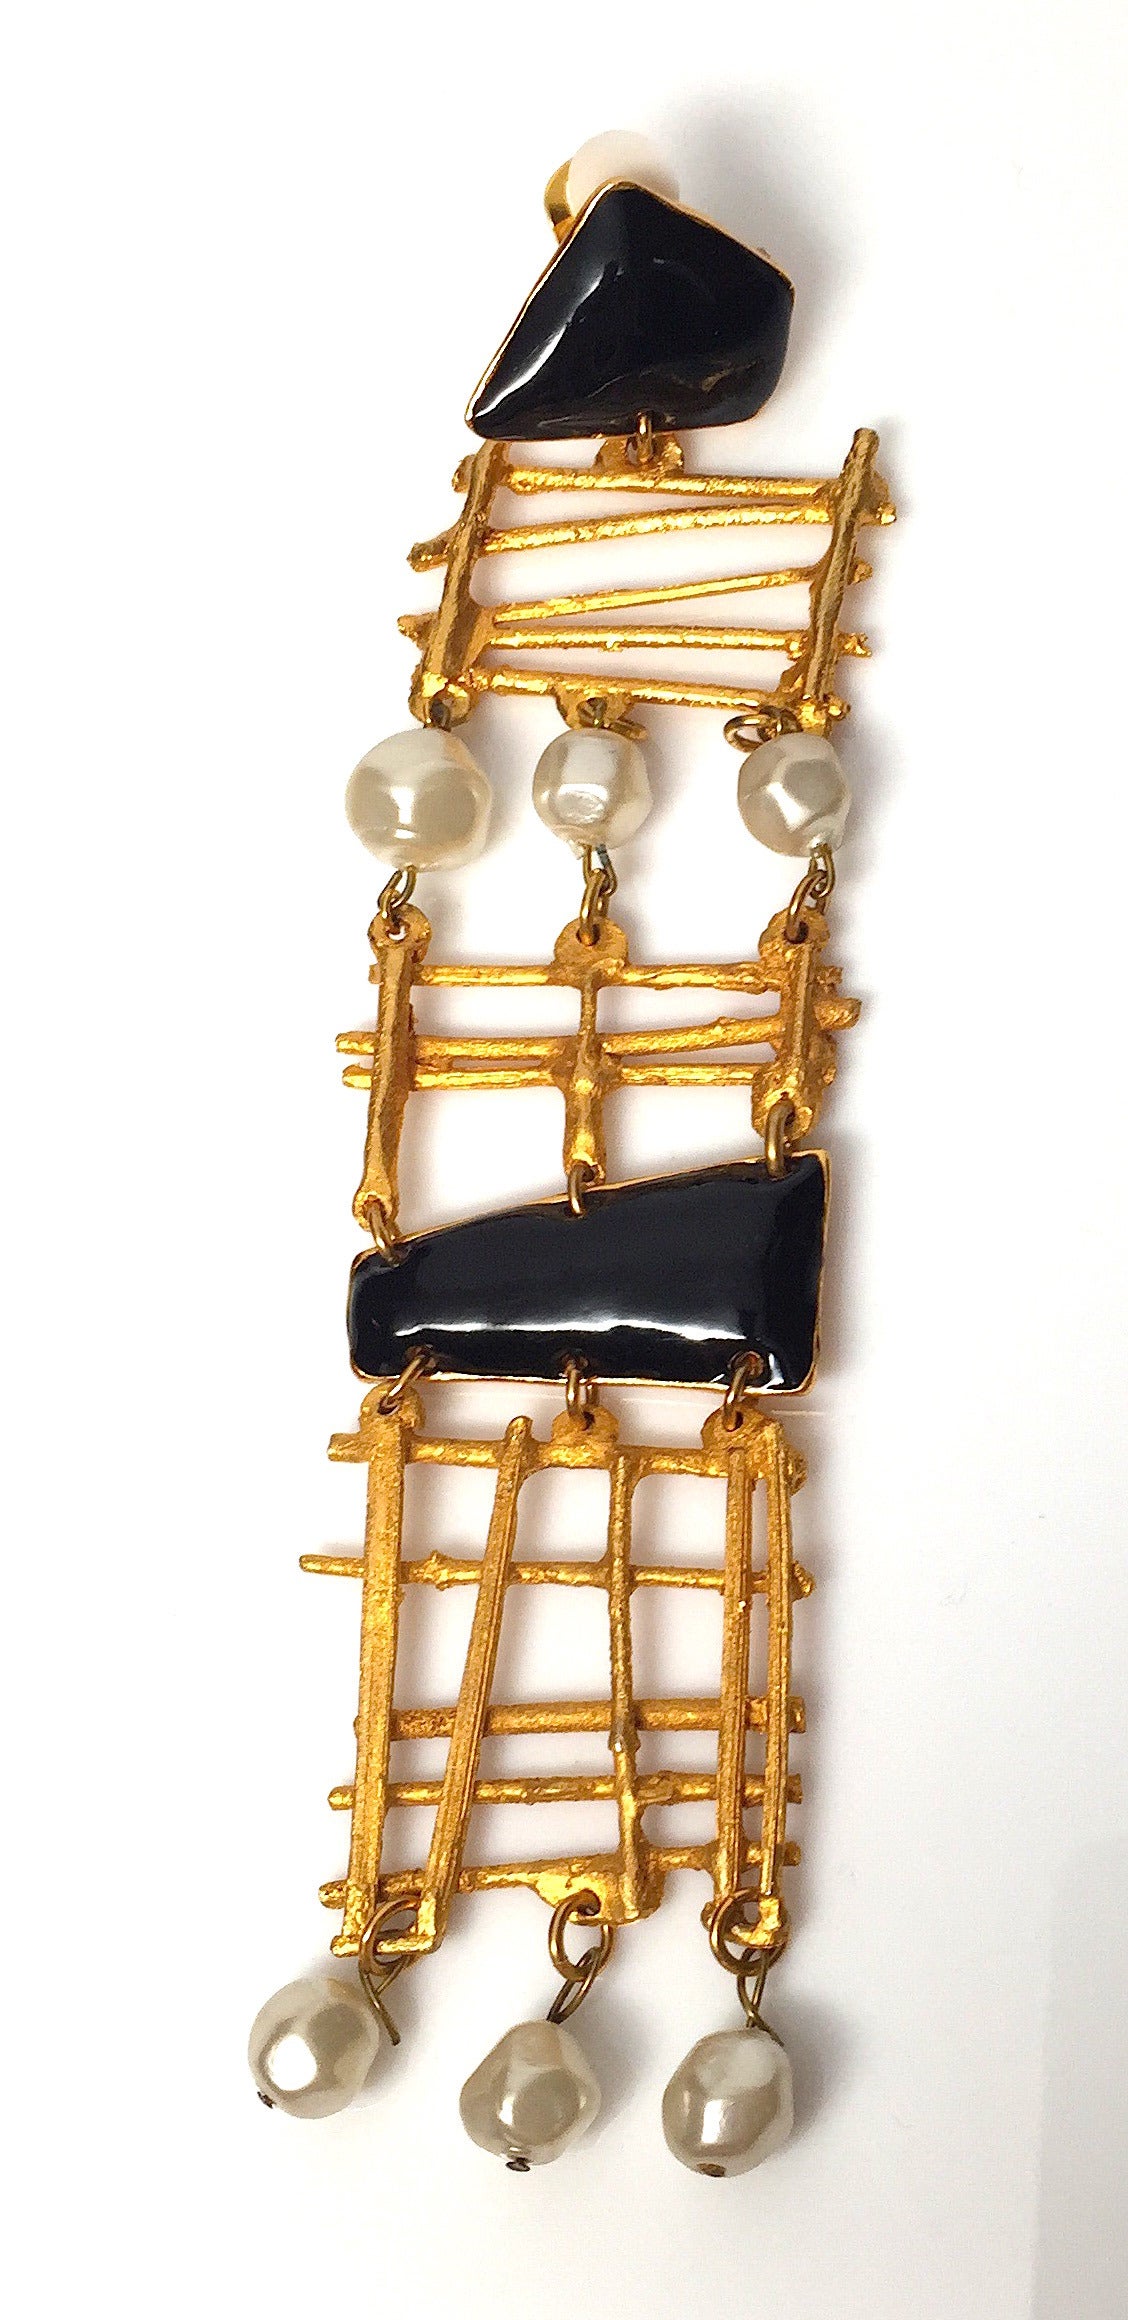 Gorgeous Christian Lacroix clip on earrings from the early 1990s featuring architectural gold-tone brass, black enamel, and faux pearl accents. Not to miss! Excellent condition.